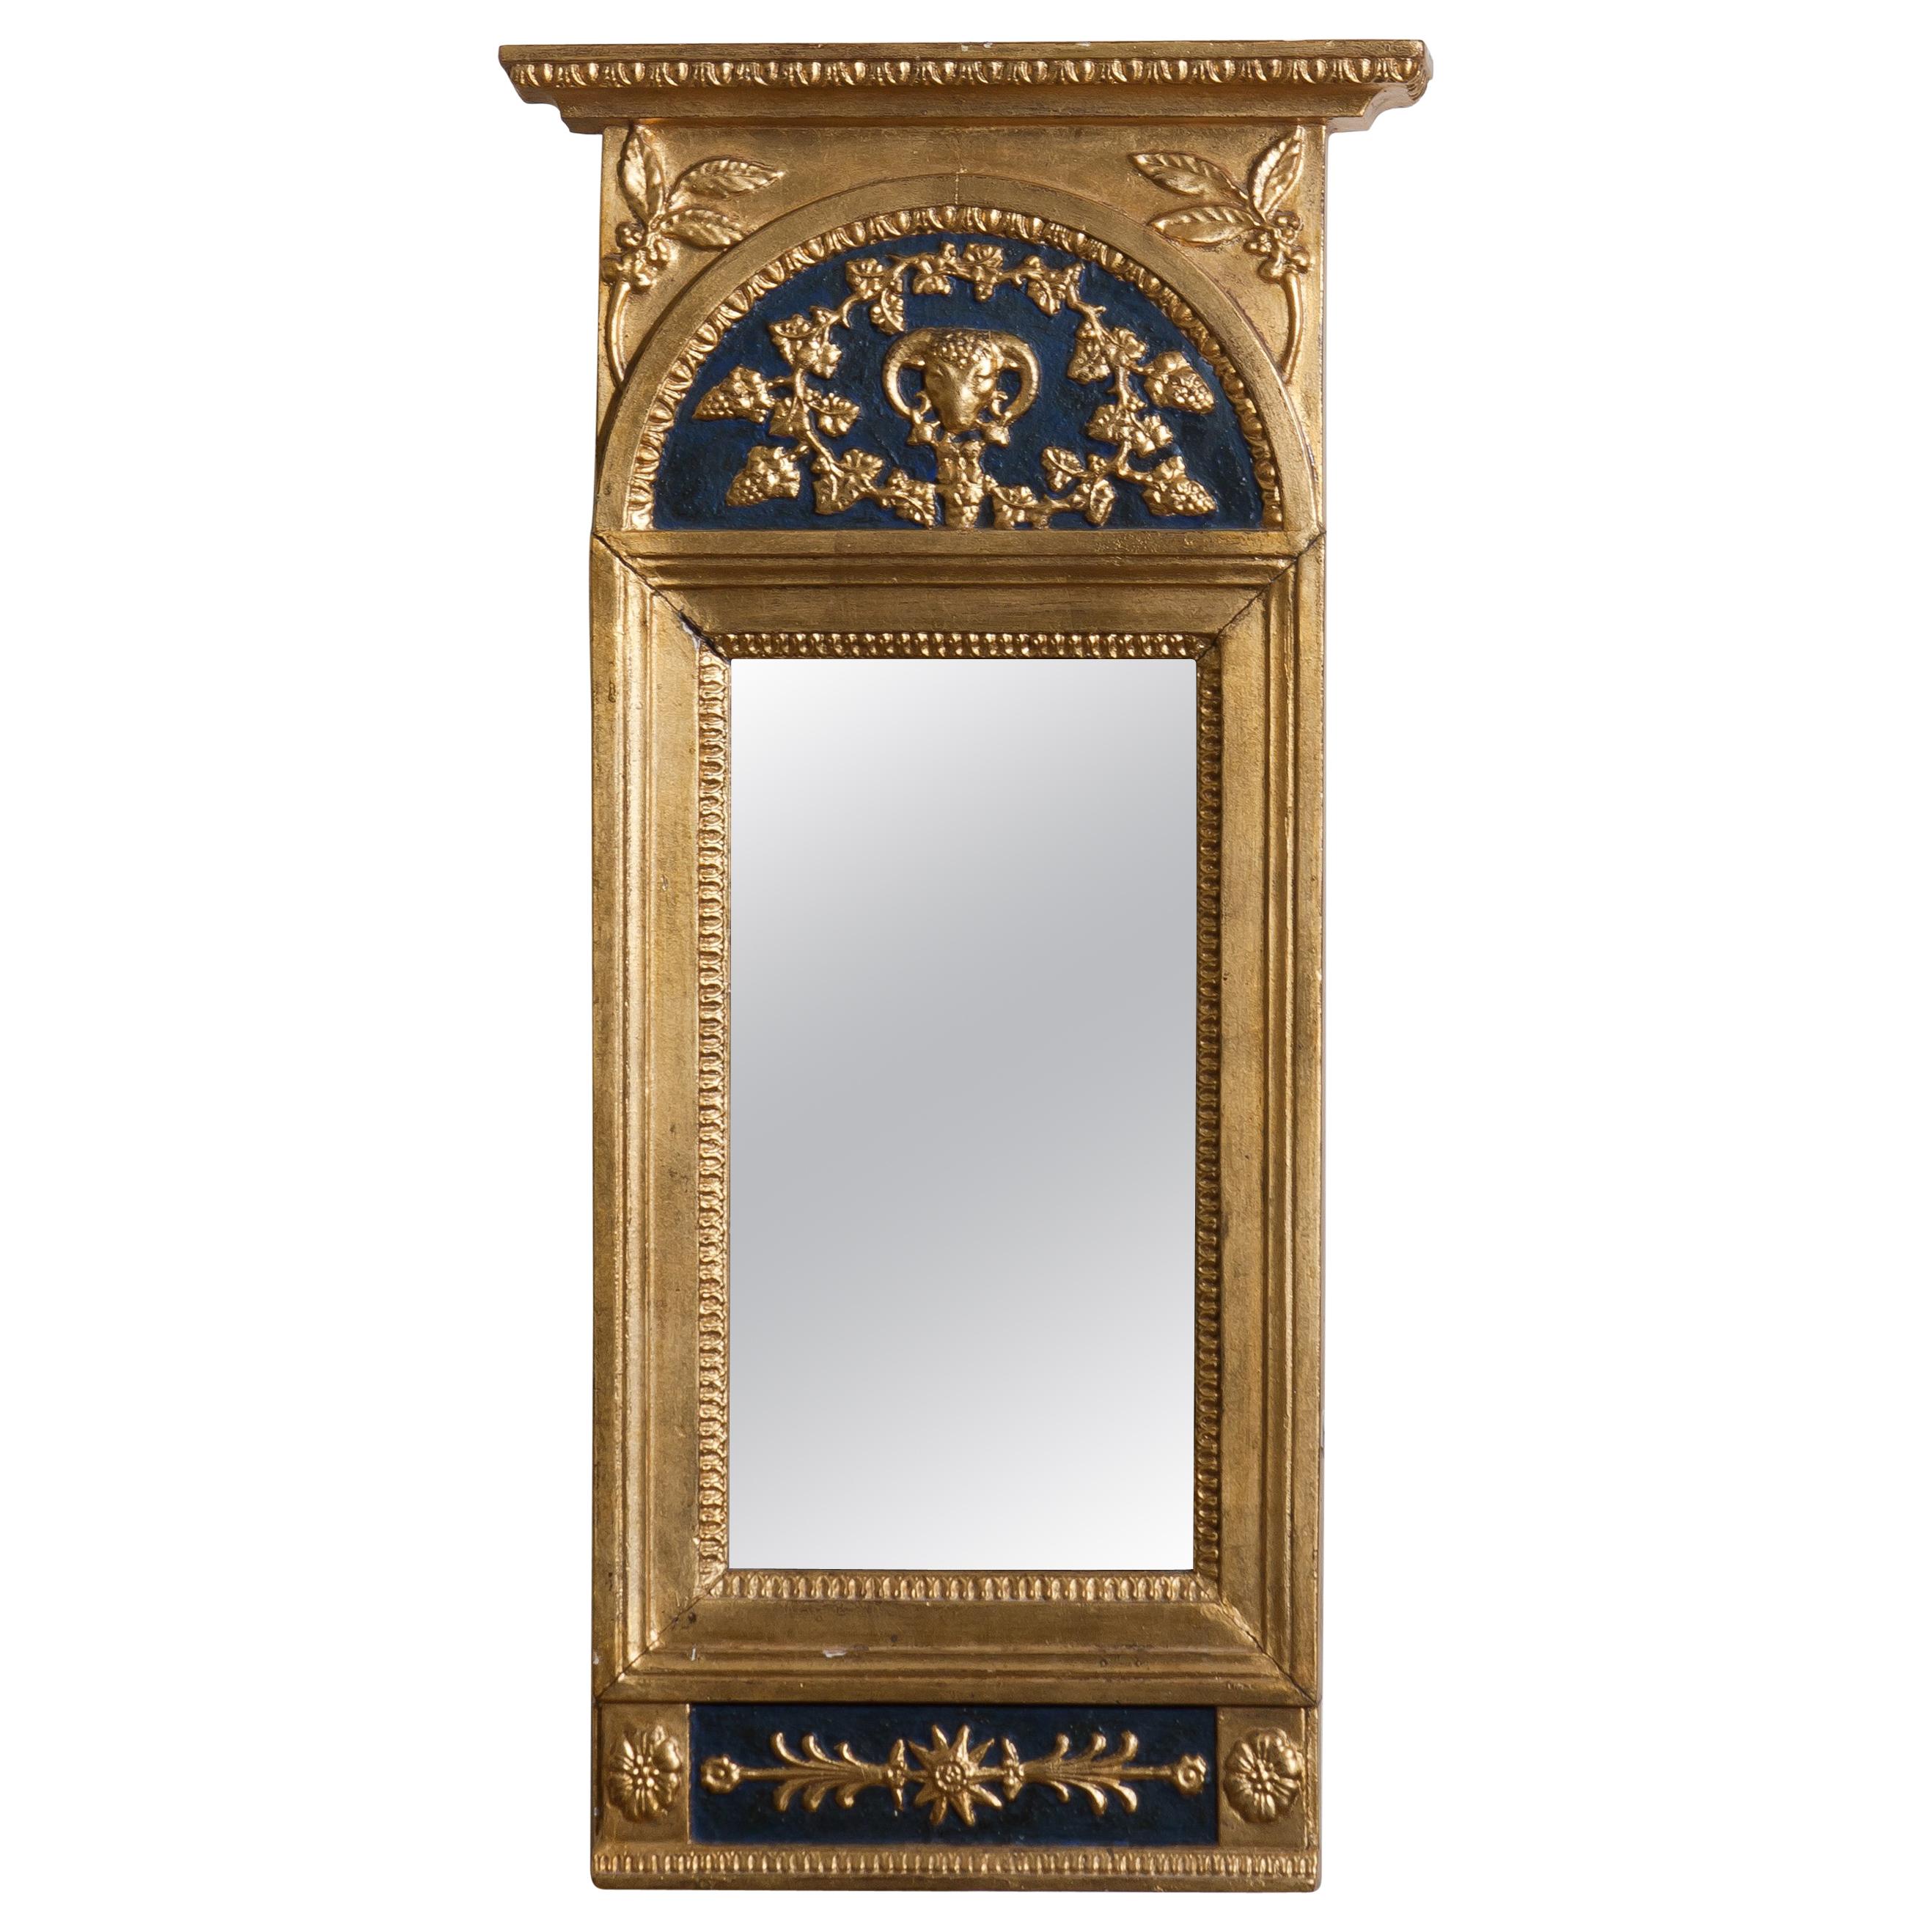 First half of the 1800s. Gilded / panted Empire mirror.
The mirror is in an later period restored and partly newly panted.
Overall condition is good.
 